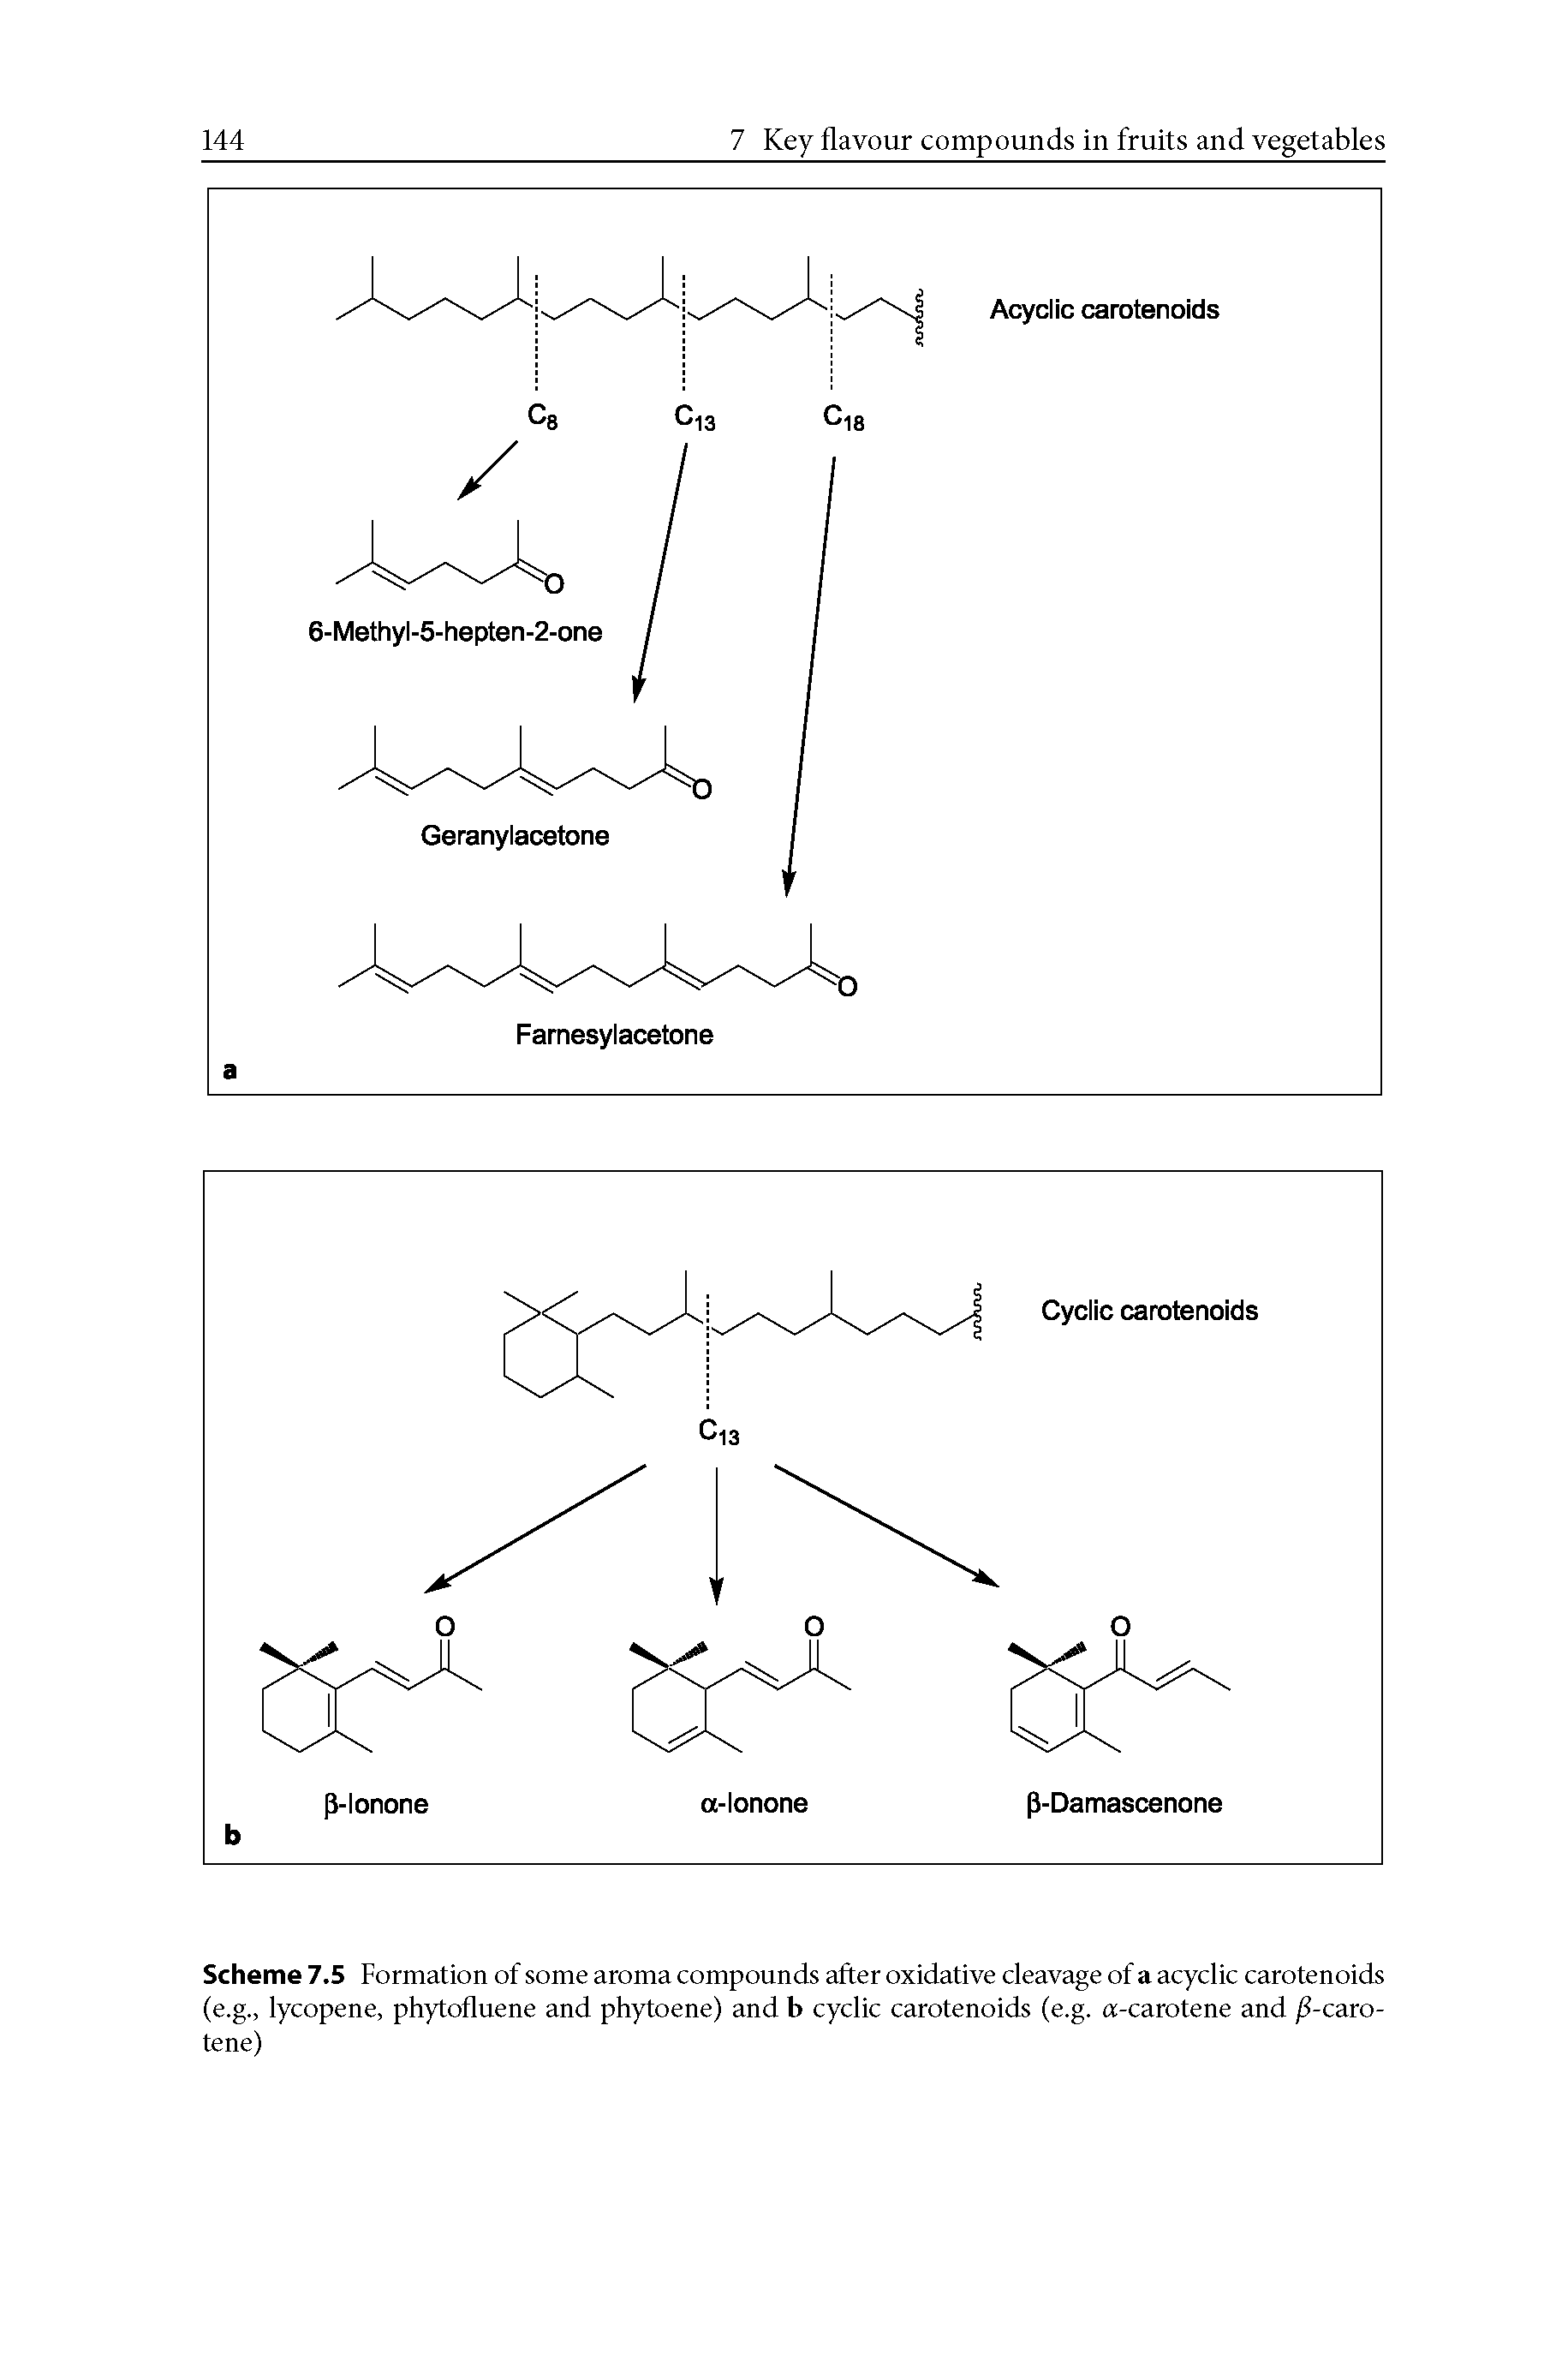 Scheme 7.5 Formation of some aroma compounds after oxidative cleavage of a acyclic carotenoids (e.g., lycopene, phytofluene and phytoene) and b cyclic carotenoids (e.g. a-carotene and / -caro-tene)...